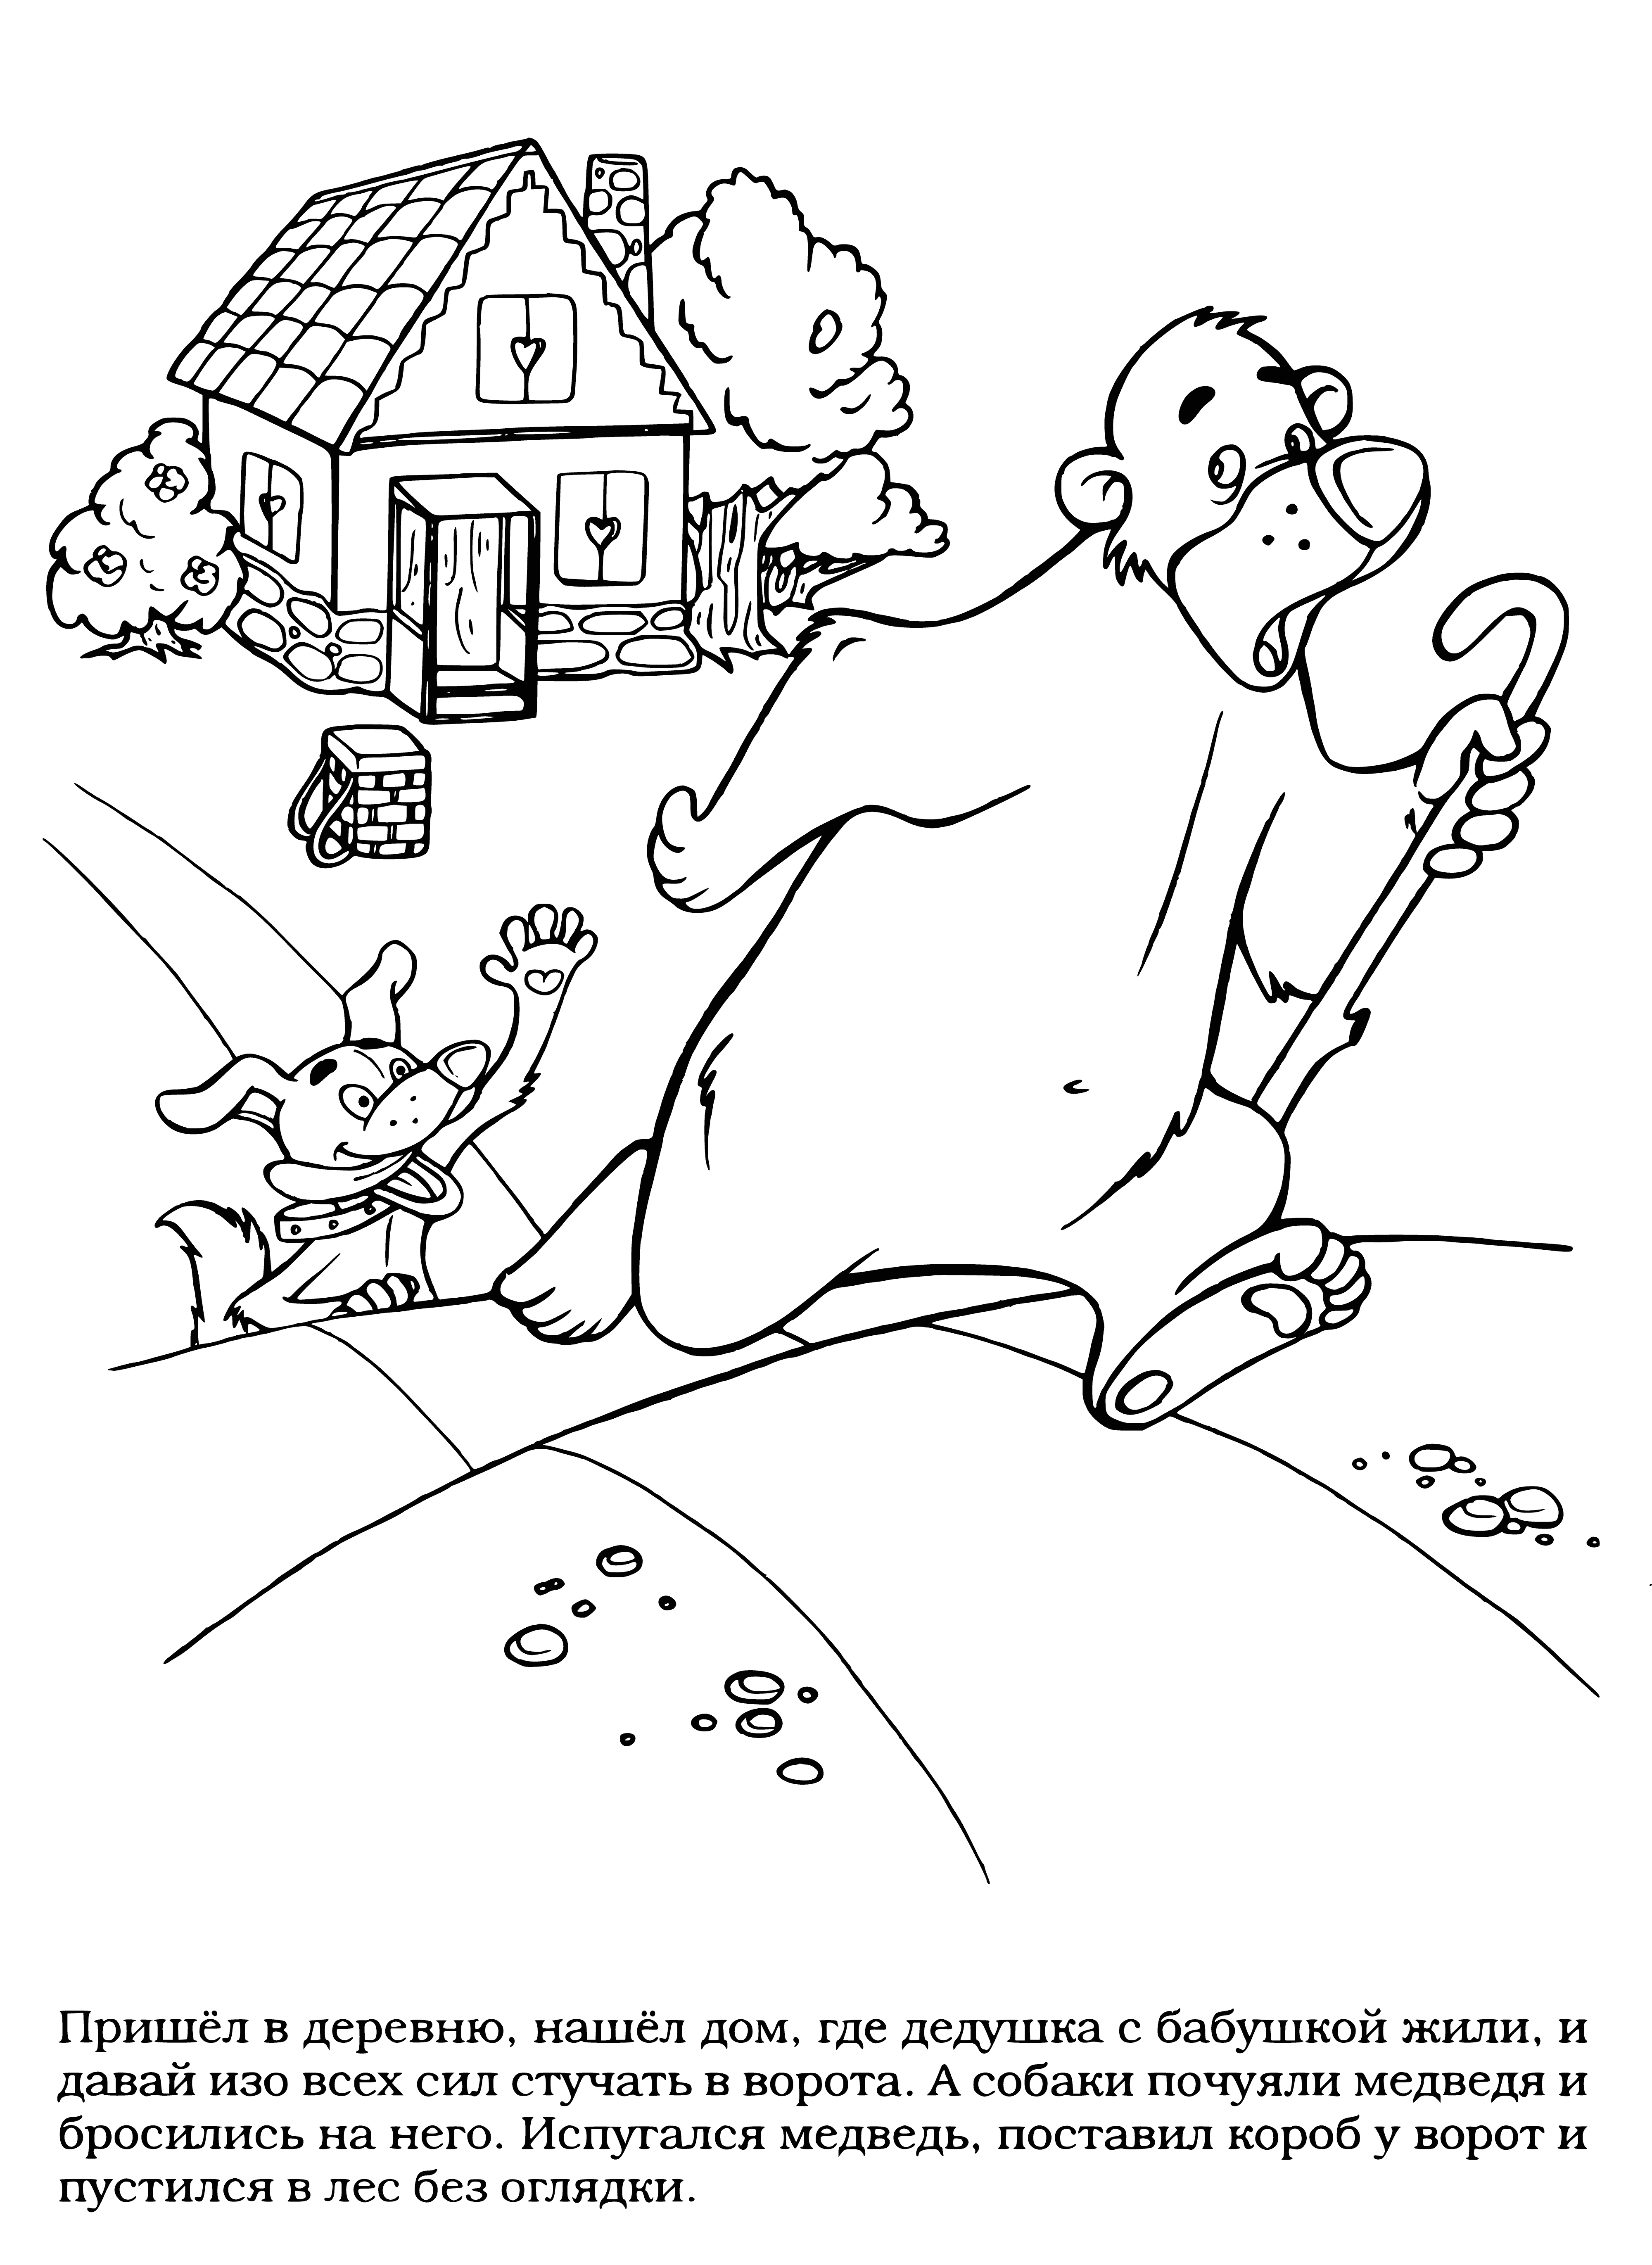 The bear is running away coloring page